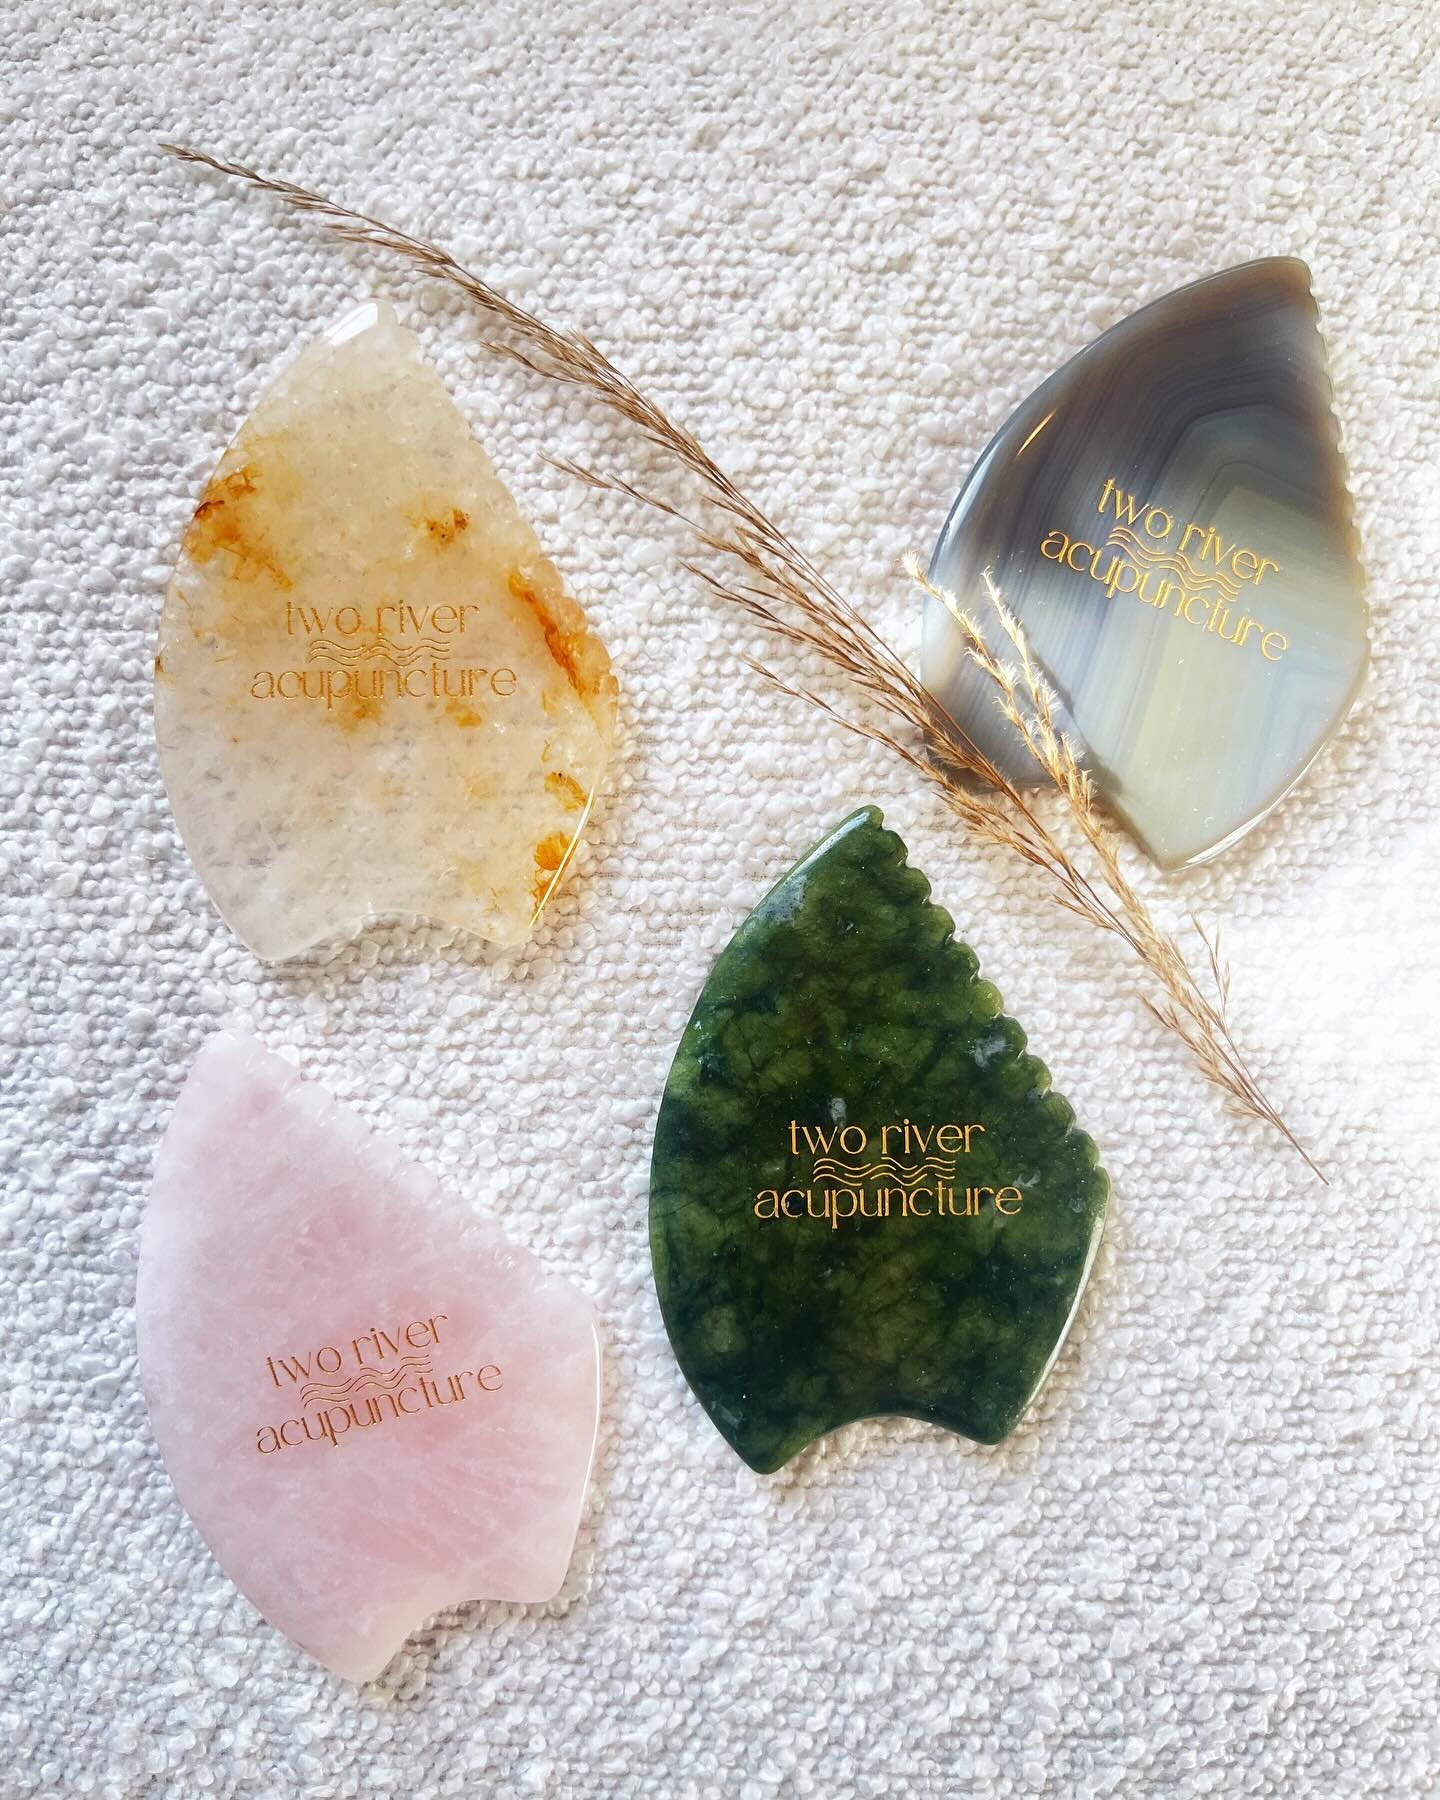 HAND CARVED GUA SHA 💎

Lift, tone, and sculpt at home

💎 Citrine - harnesses energy from the sun &amp; has brightening properties the skin ☀️
💎 Agate - known for its mix of darkly opaque and brightly translucent bands, it balances Yin &amp; Yang e